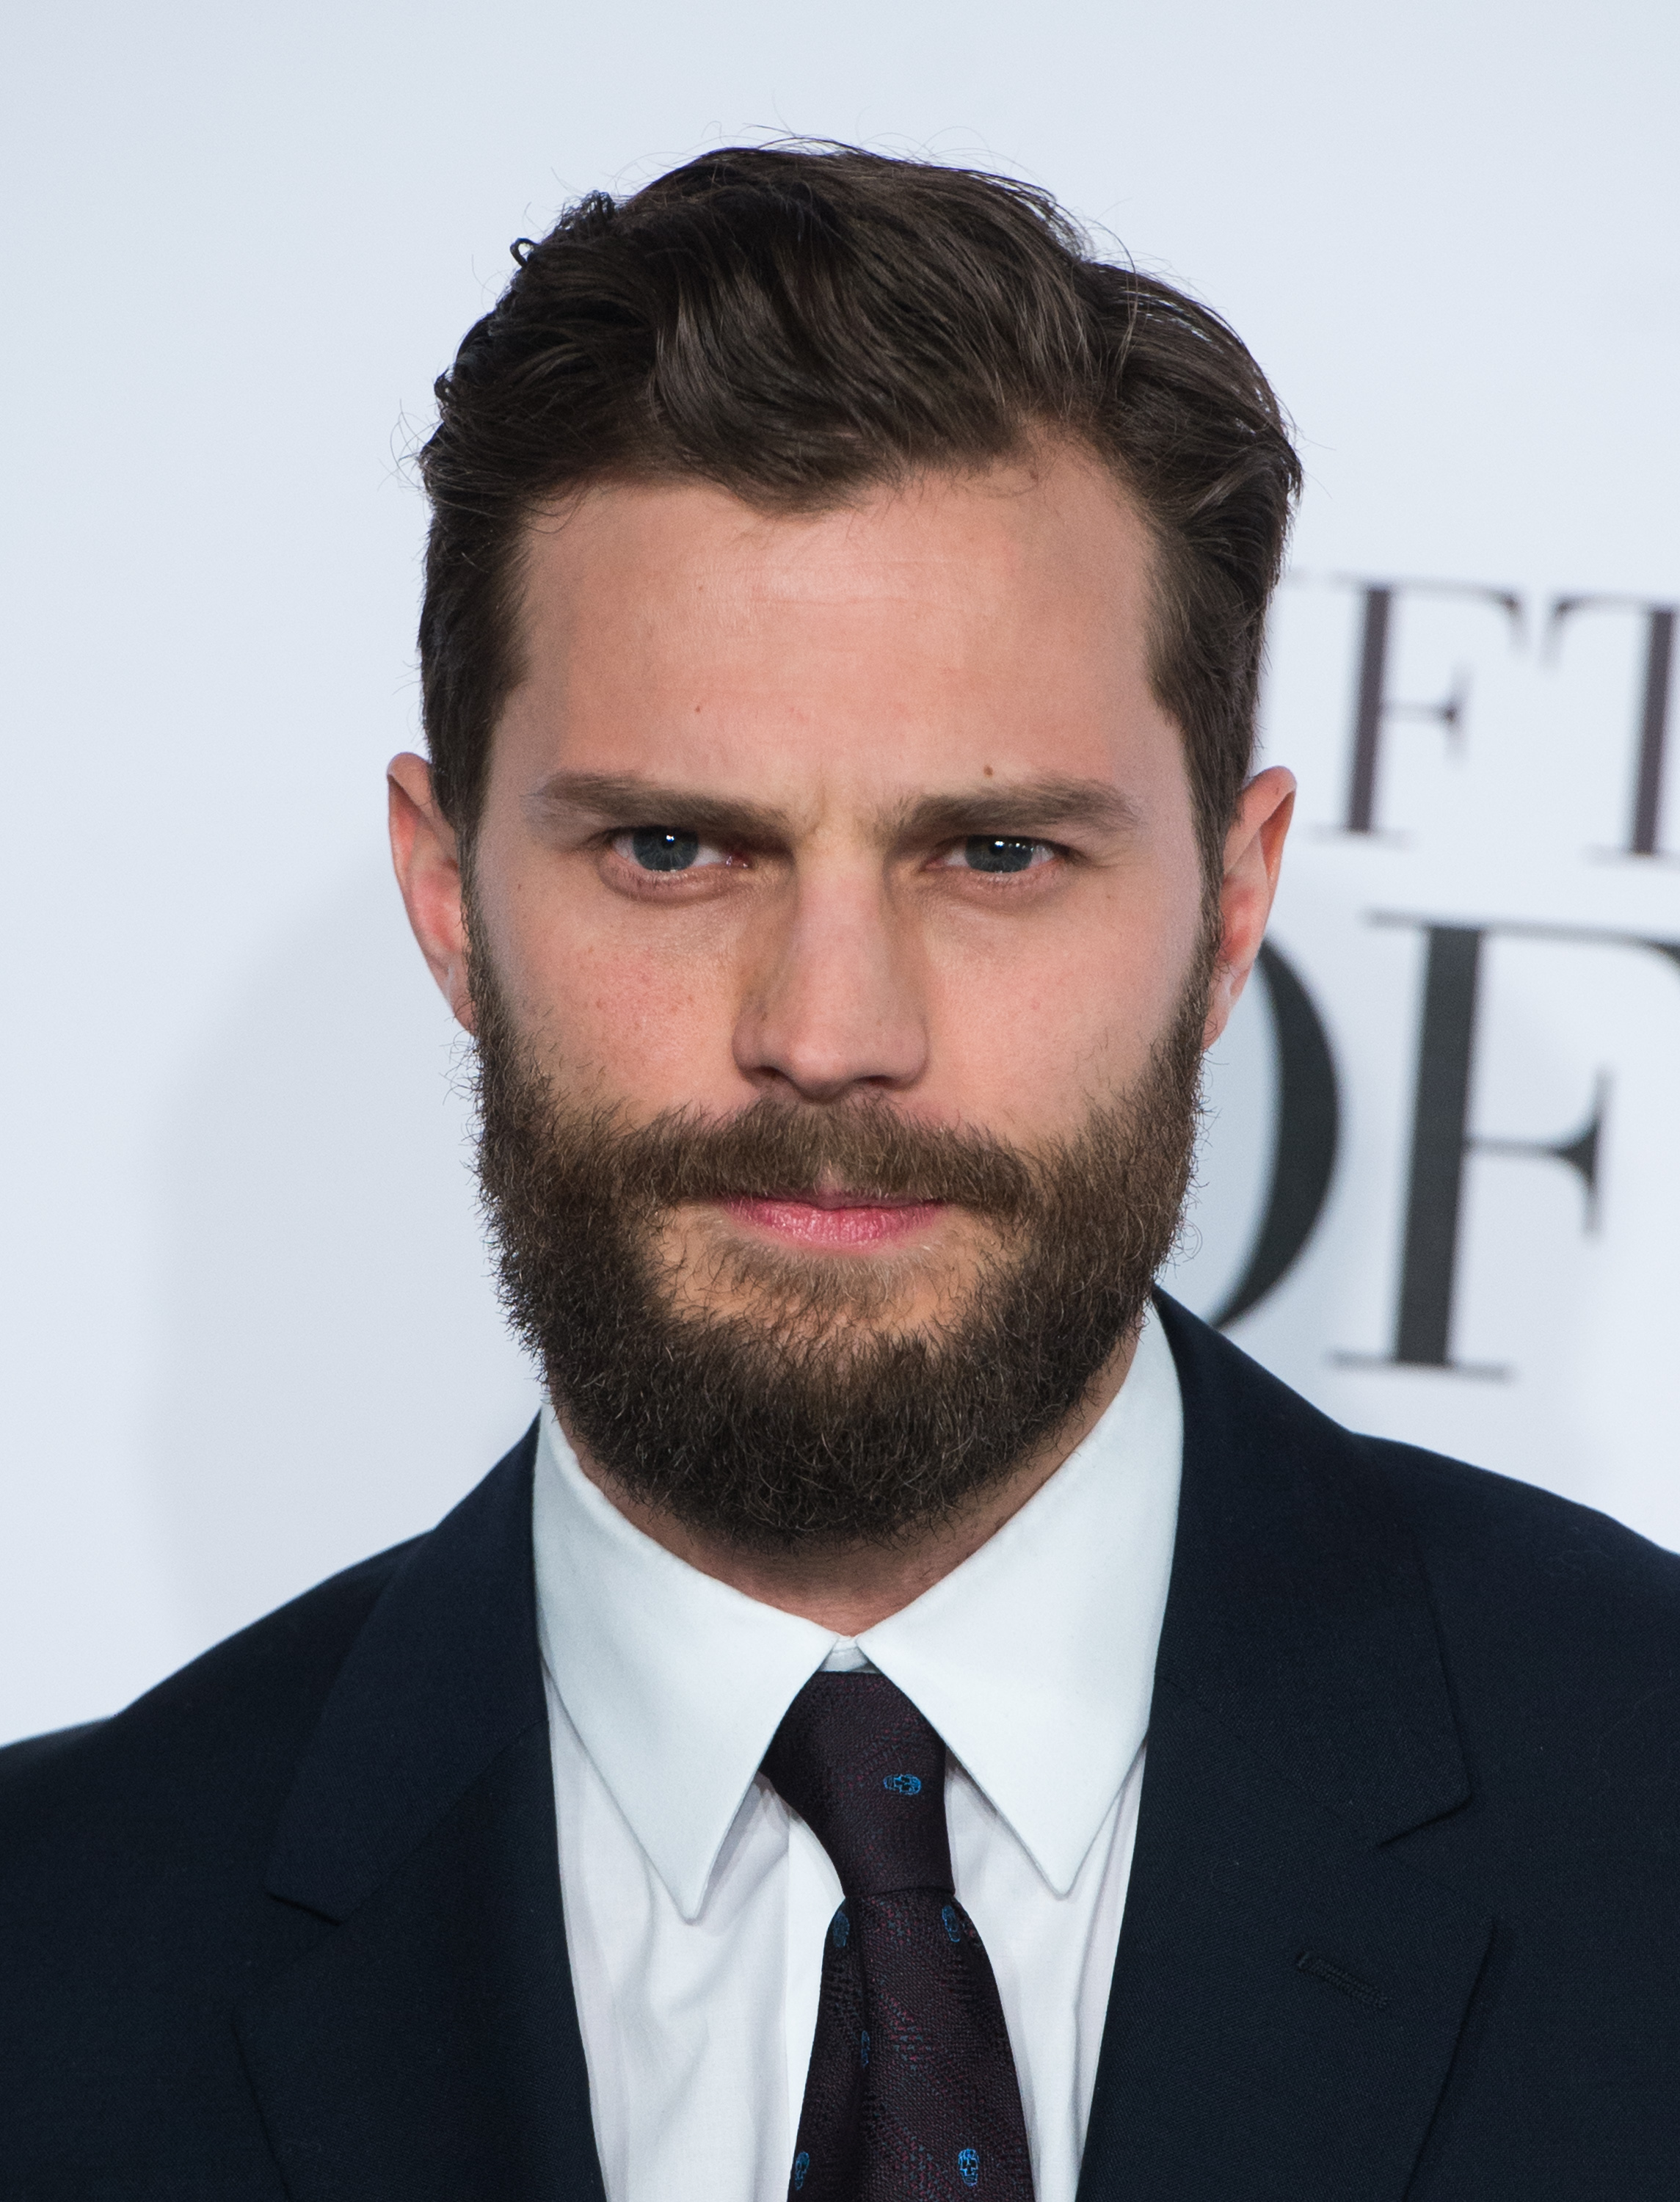 Jamie Dornan attends the UK Premiere of 'Fifty Shades Of Grey' in London on Feb. 12, 2015. (Samir Hussein—Getty Images)